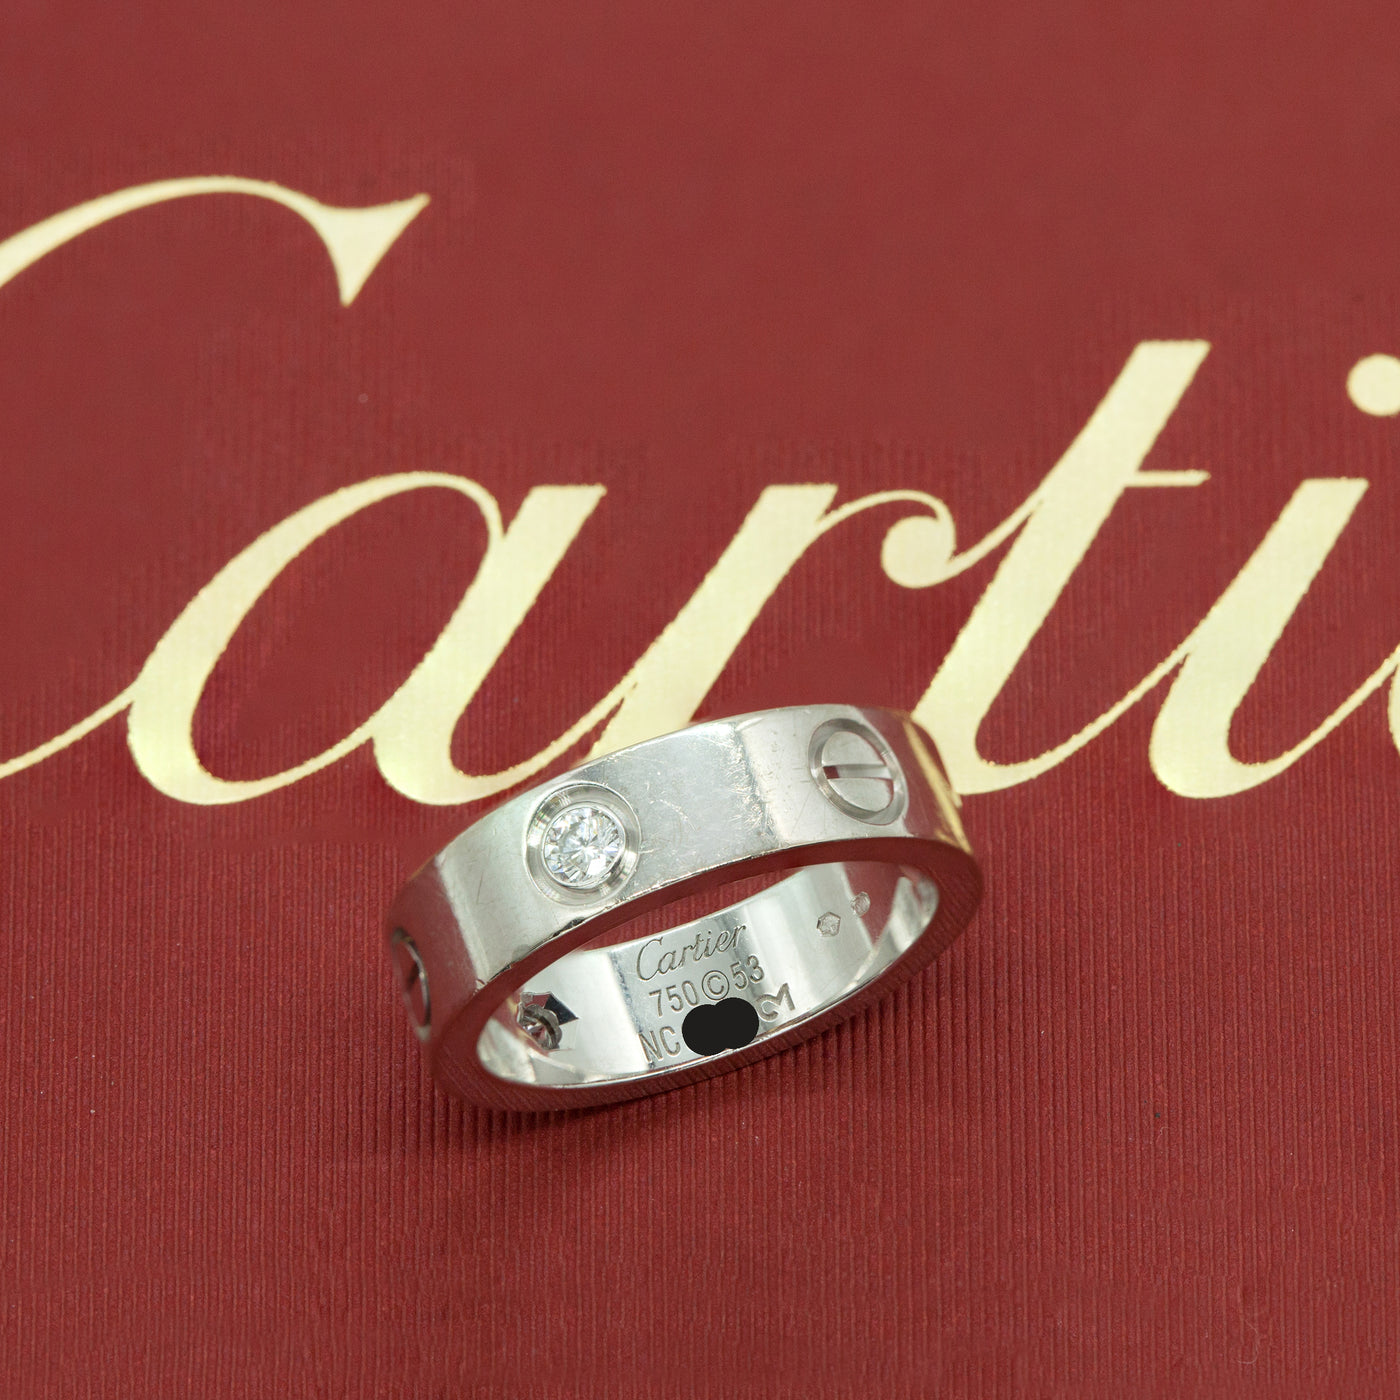 Cartier Engagement Ring | Engagement rings cartier, Cartier wedding rings,  Engagement